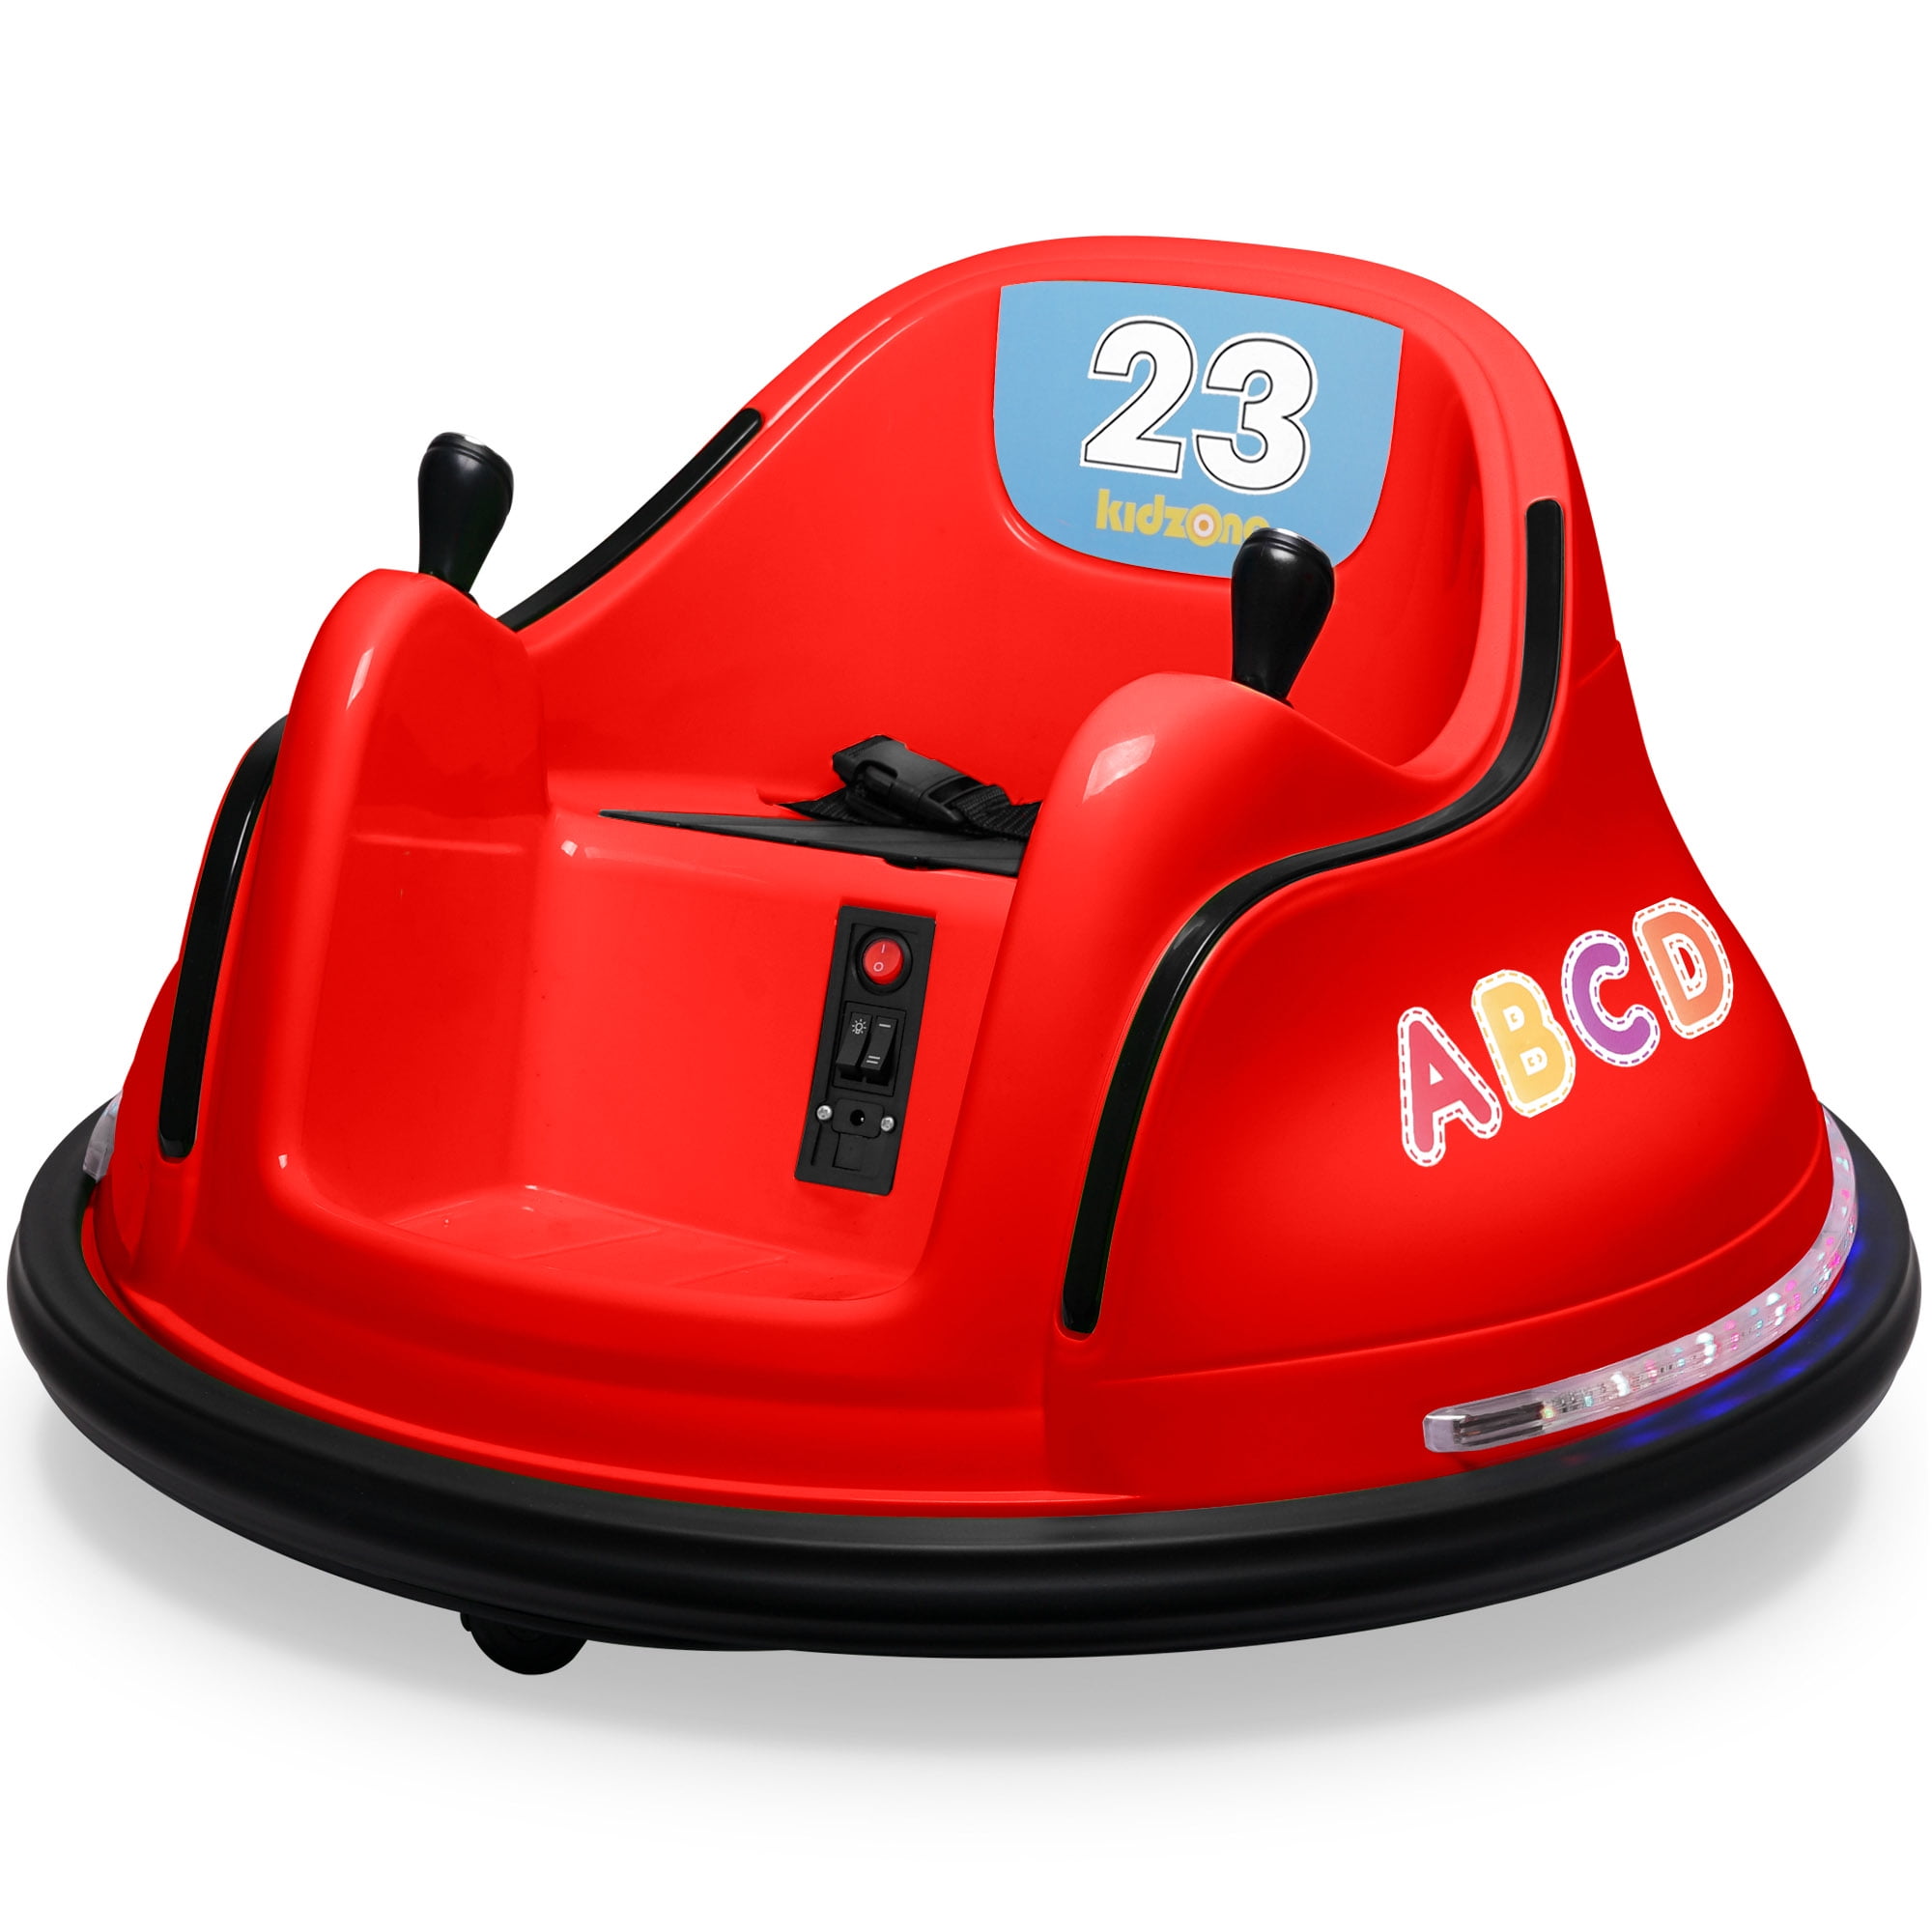 Kidzone DIY Race #00-99 6V Kids Toy Electric Red Ride On Bumper Car Vehicle Remote Control 360 Spin ASTM-Certified